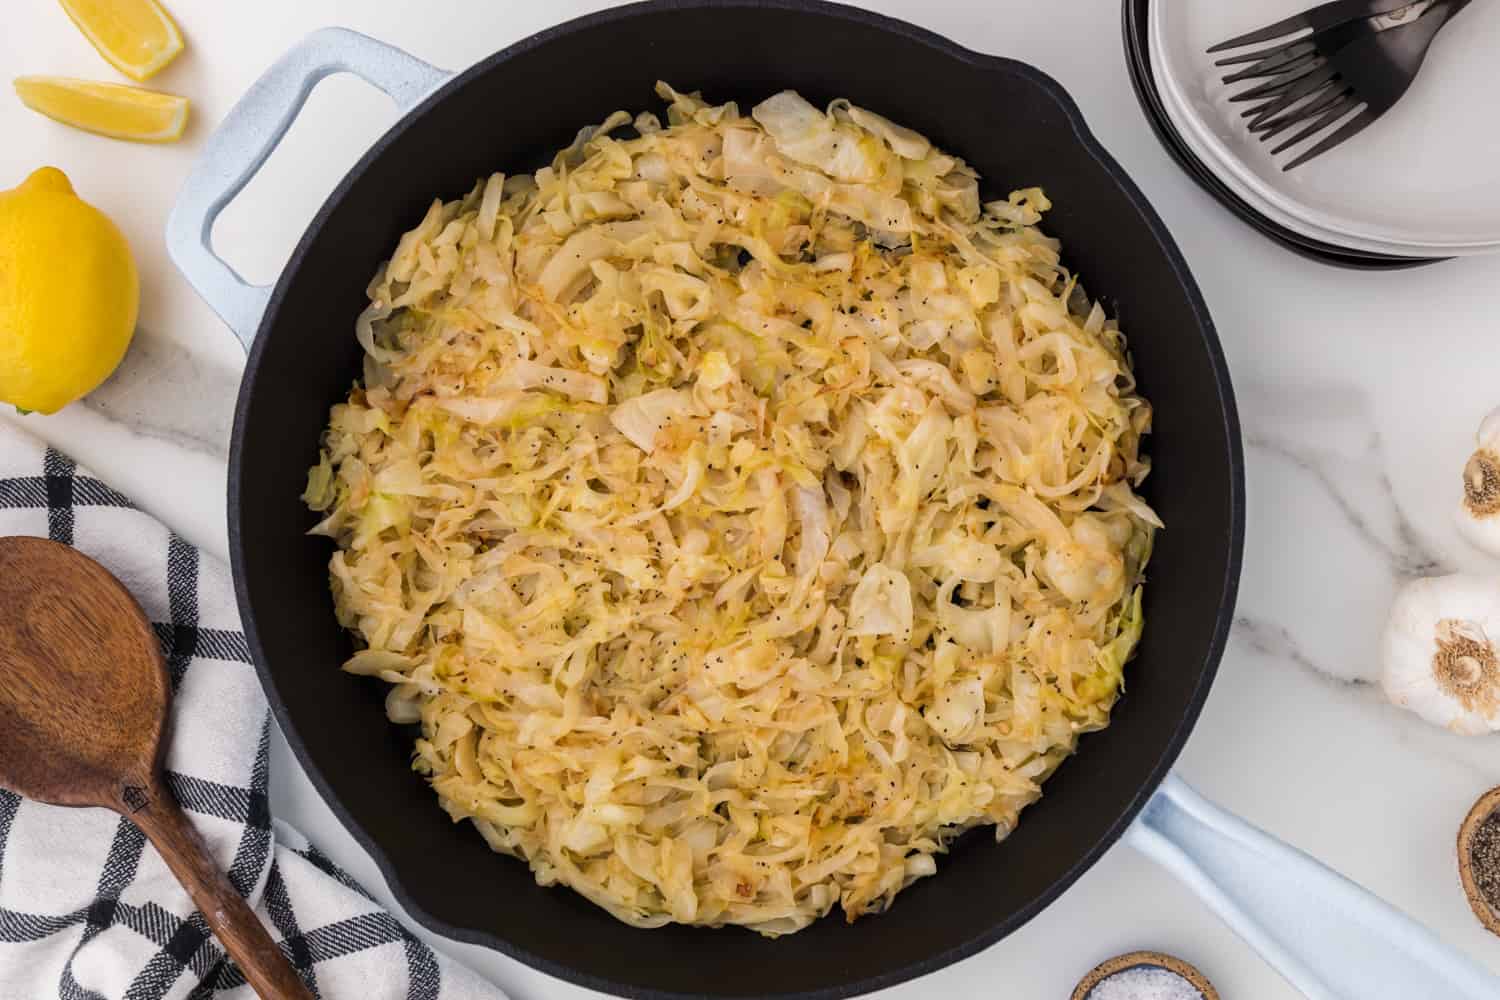 Cooked cabbage in skillet.